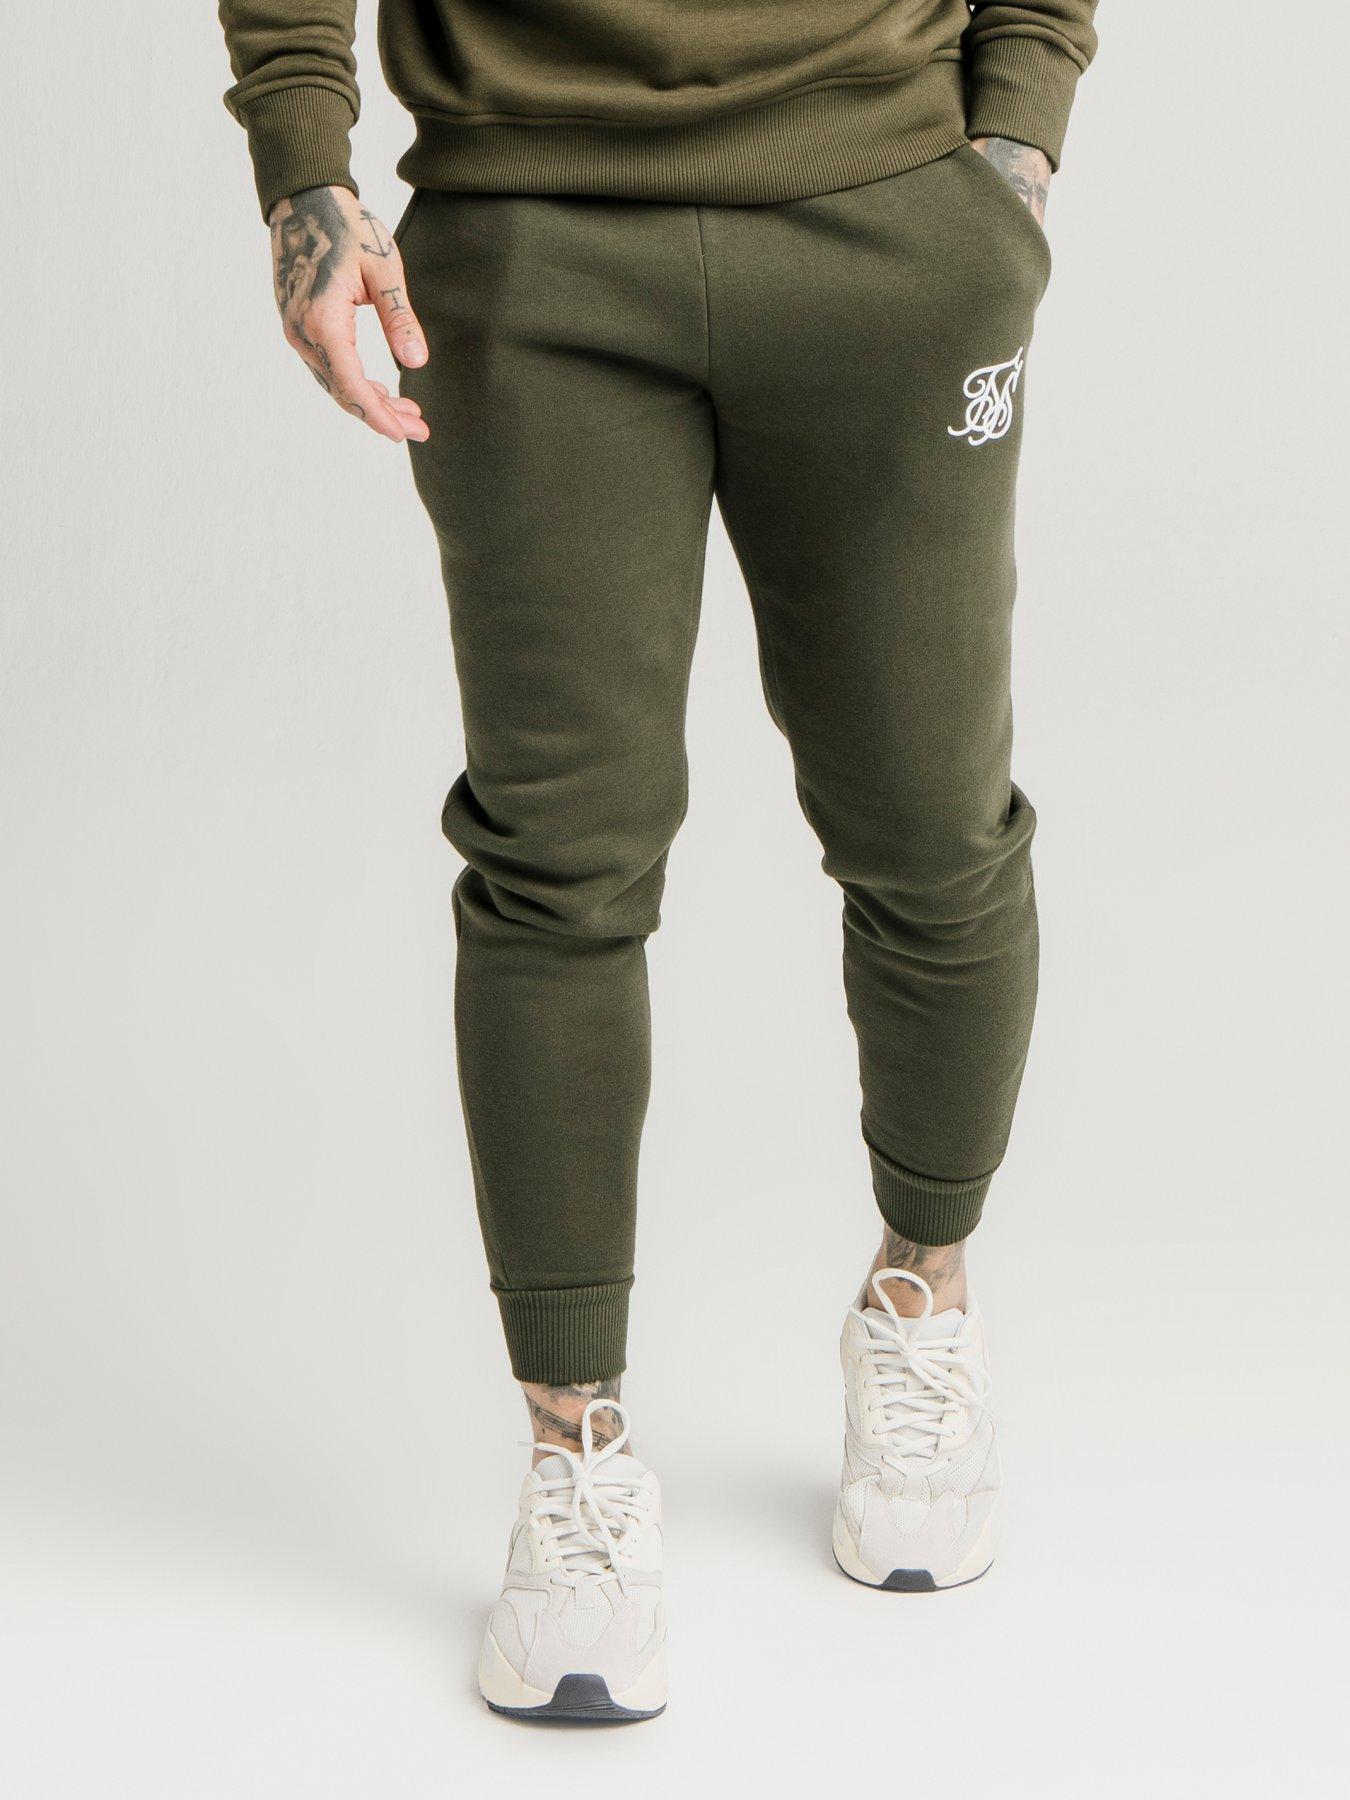 Sik Silk Muscle Fit Jogger - Khaki | very.co.uk